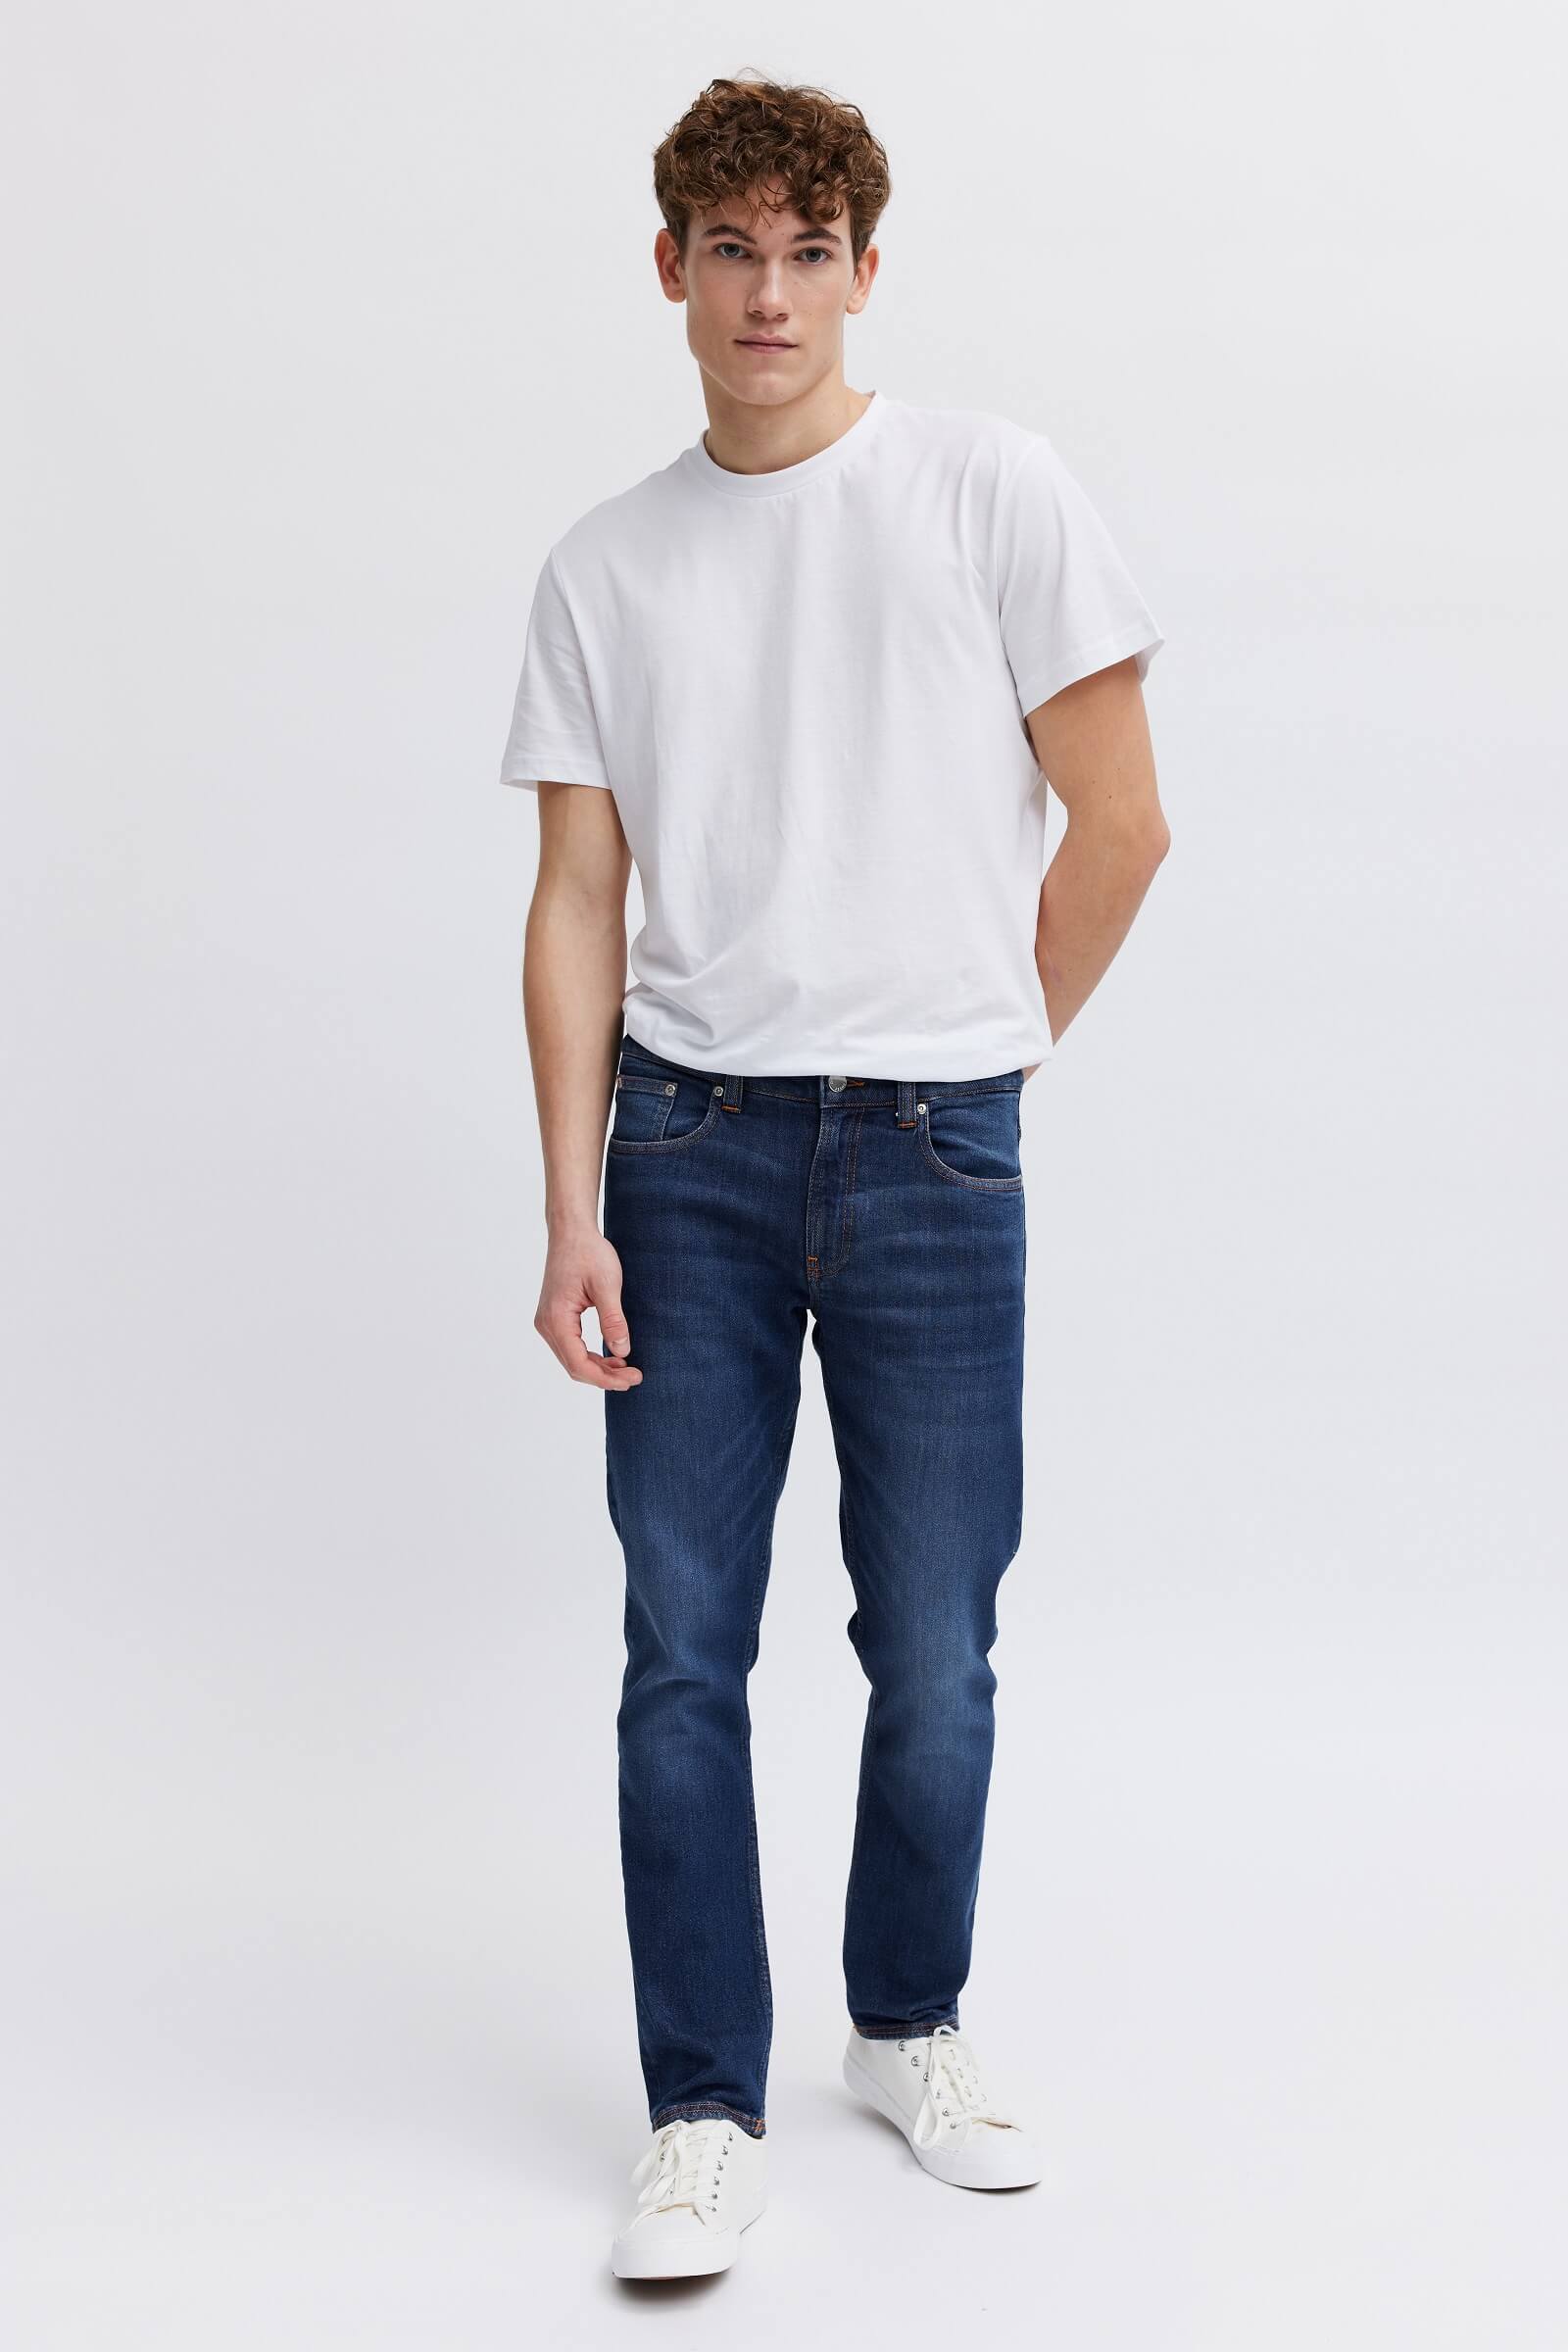 Vegan, stylish and comfy jeans for men